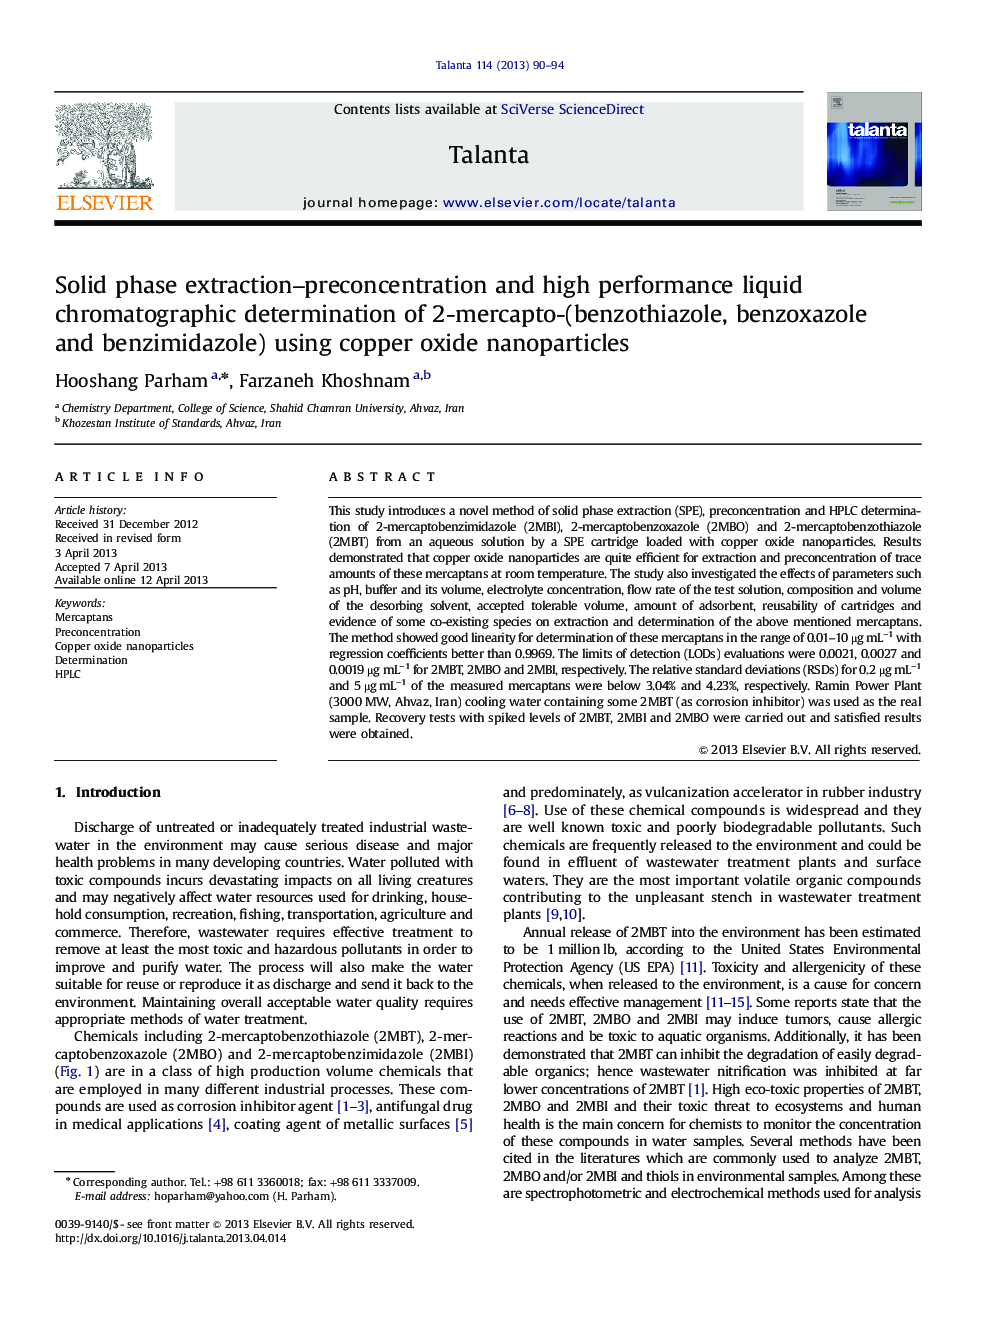 Solid phase extraction-preconcentration and high performance liquid chromatographic determination of 2-mercapto-(benzothiazole, benzoxazole and benzimidazole) using copper oxide nanoparticles